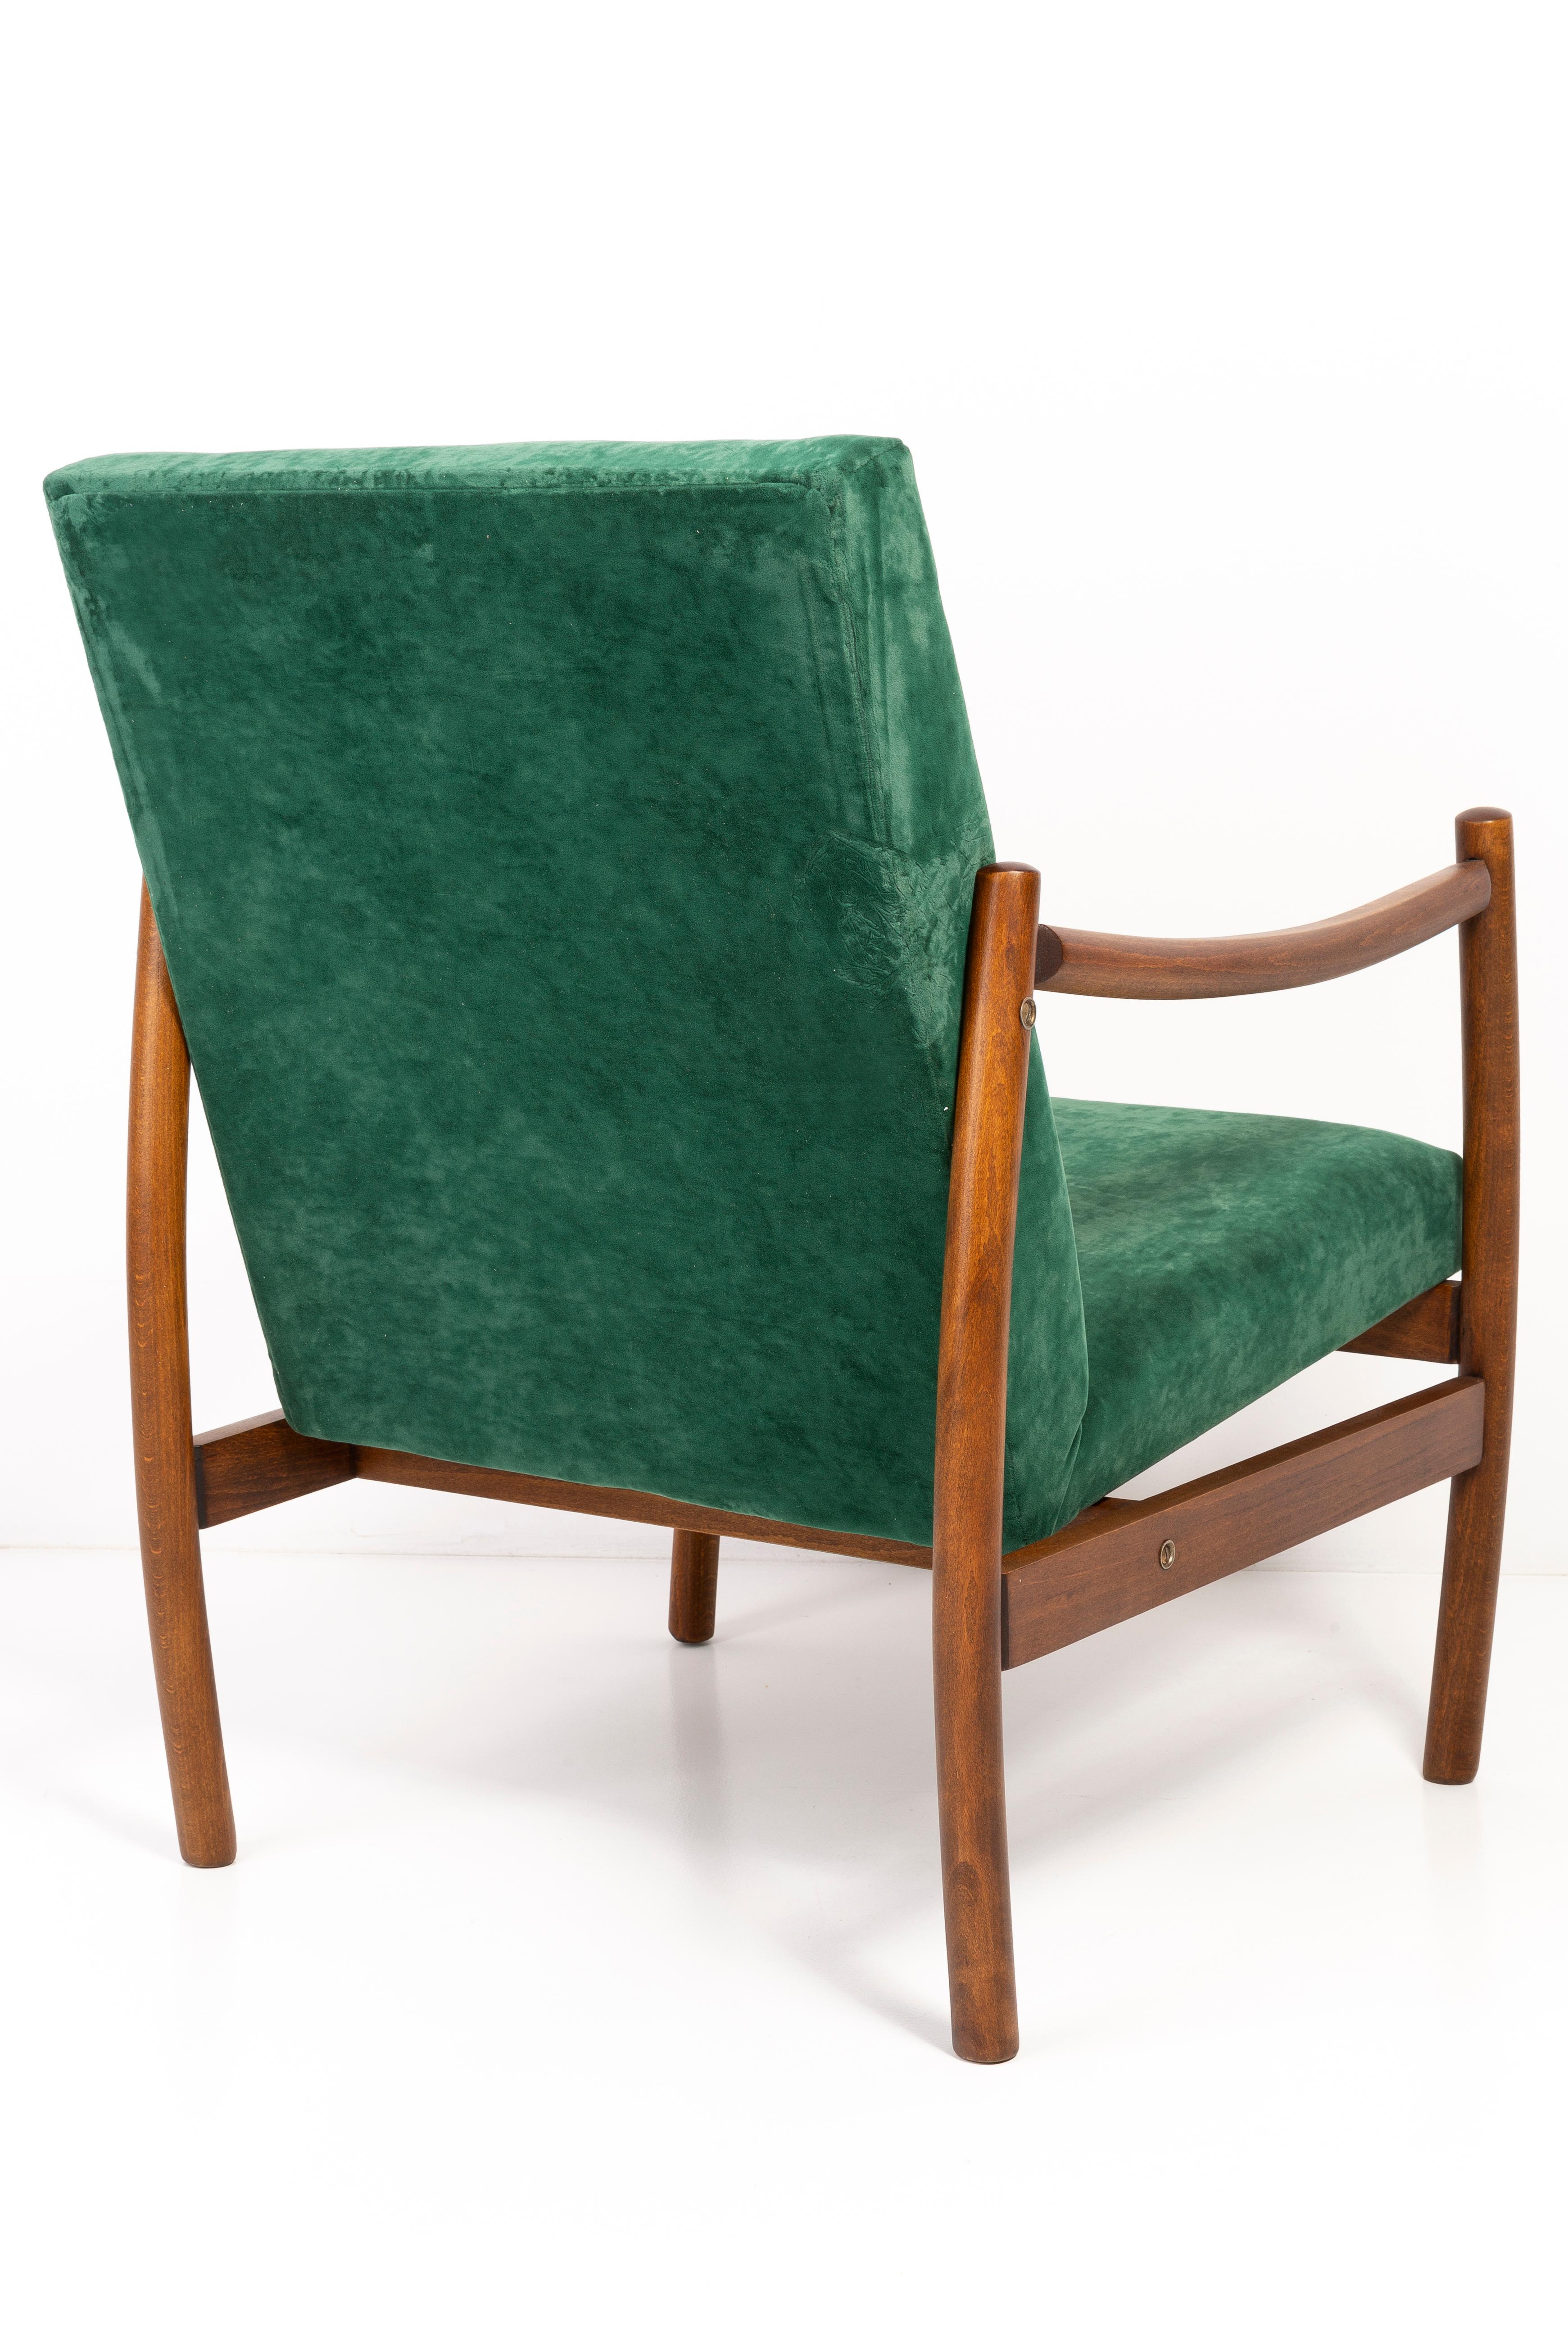 Set of Two Mid-20th Century Vintage Armchairs, Dark Green Velvet, Europe, 1960s For Sale 2